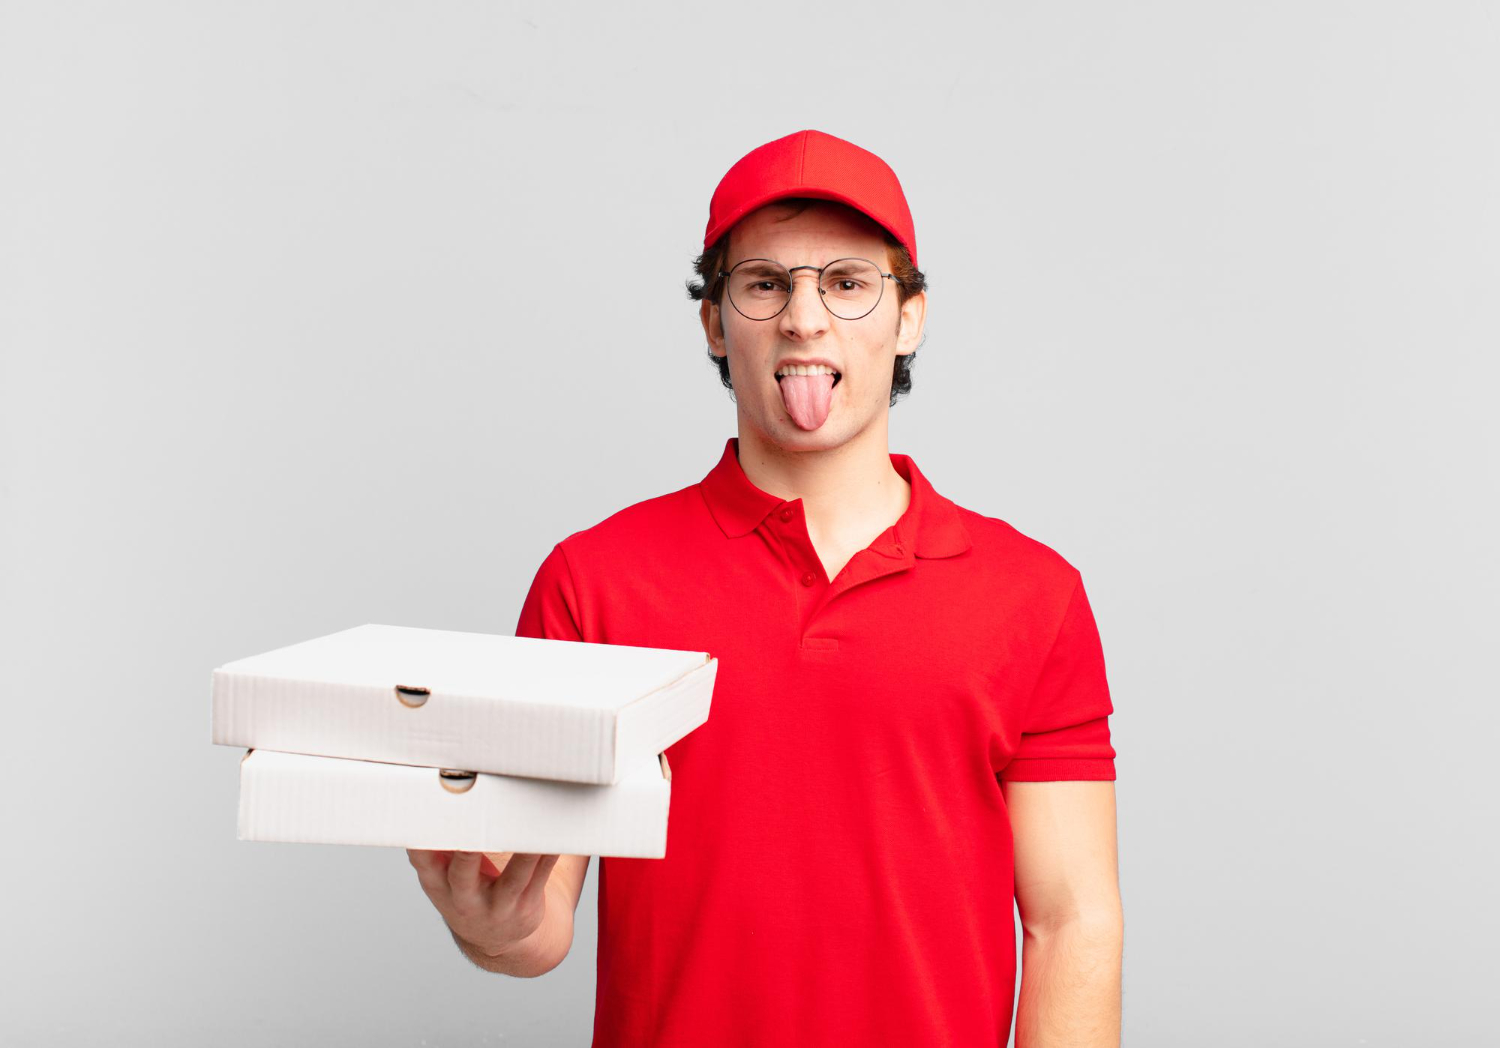 pizza hut delivery boy feeling irritated sticking his tongue out disliking something nasty